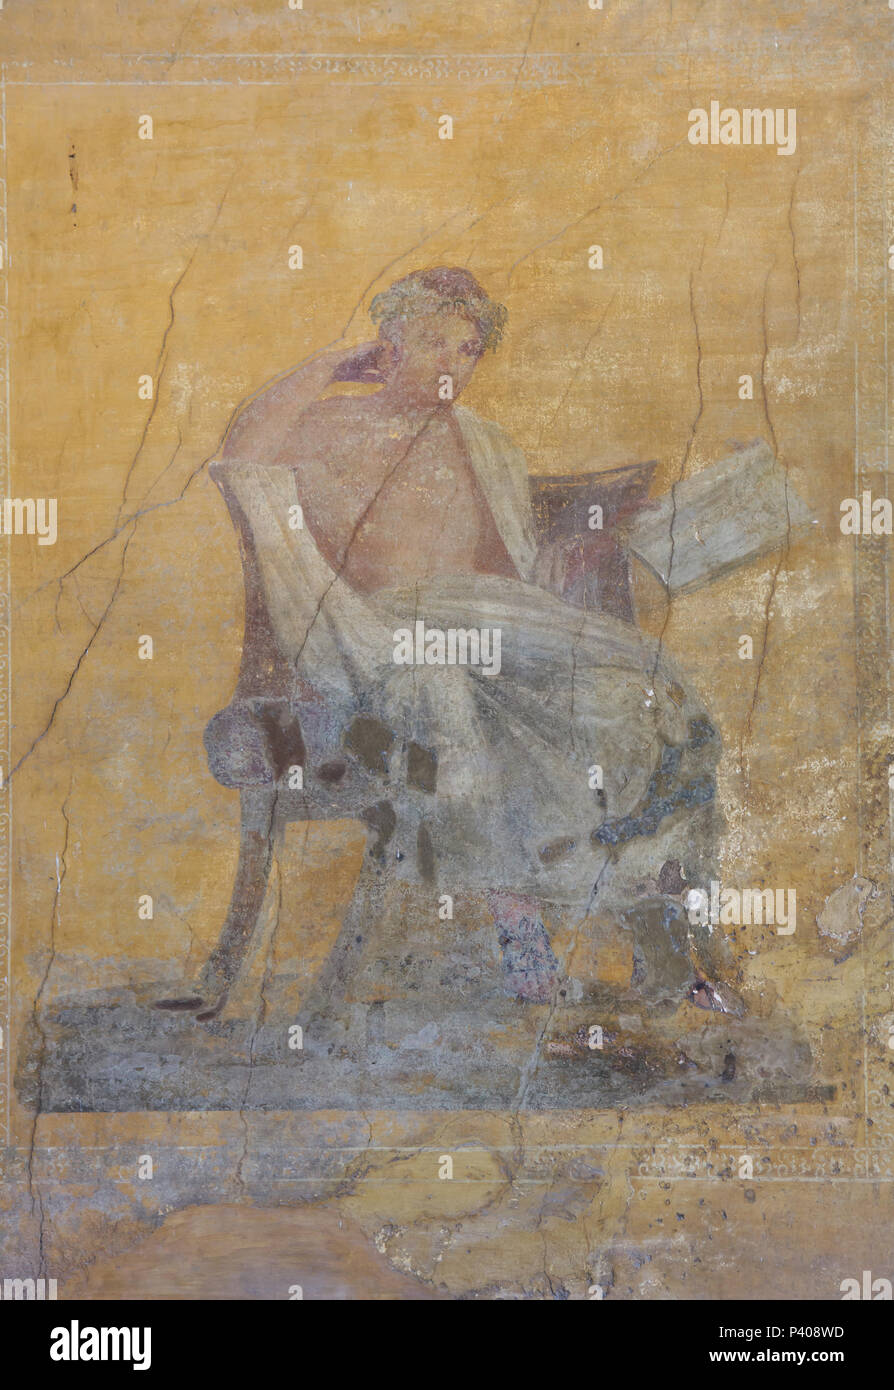 Greek dramatist Menander (342-290 BC) depicted in the Roman fresco in the House of Menander (Casa del Menandro) in the archaeological site of Pompeii (Pompei) near Naples, Campania, Italy. Stock Photo